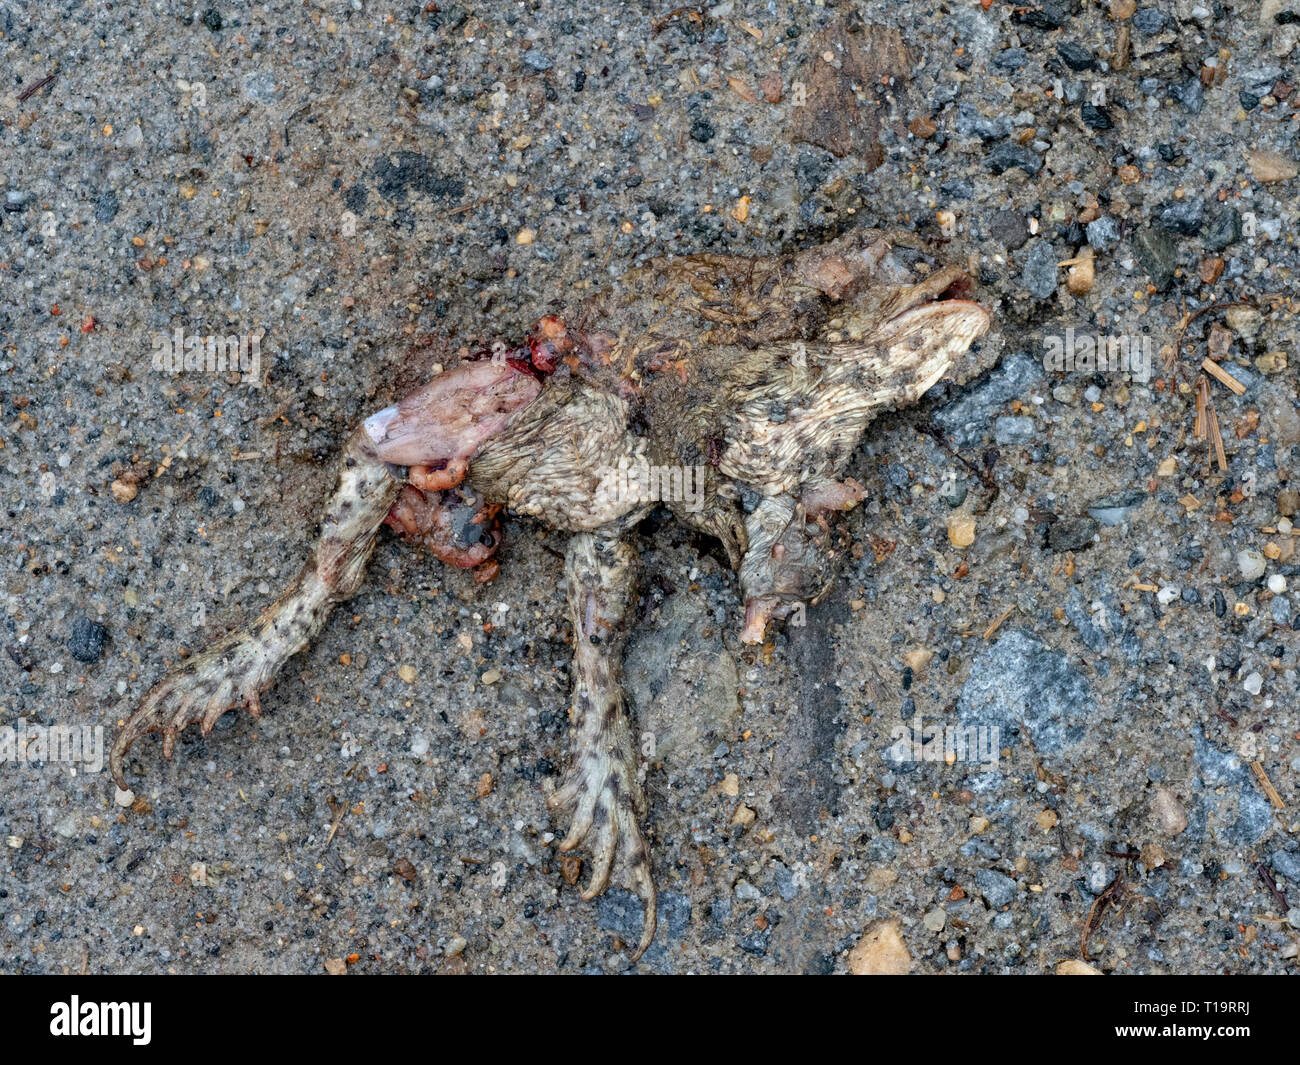 Pair of Common Toads in Aplexus killed on a country lane, UK Stock Photo